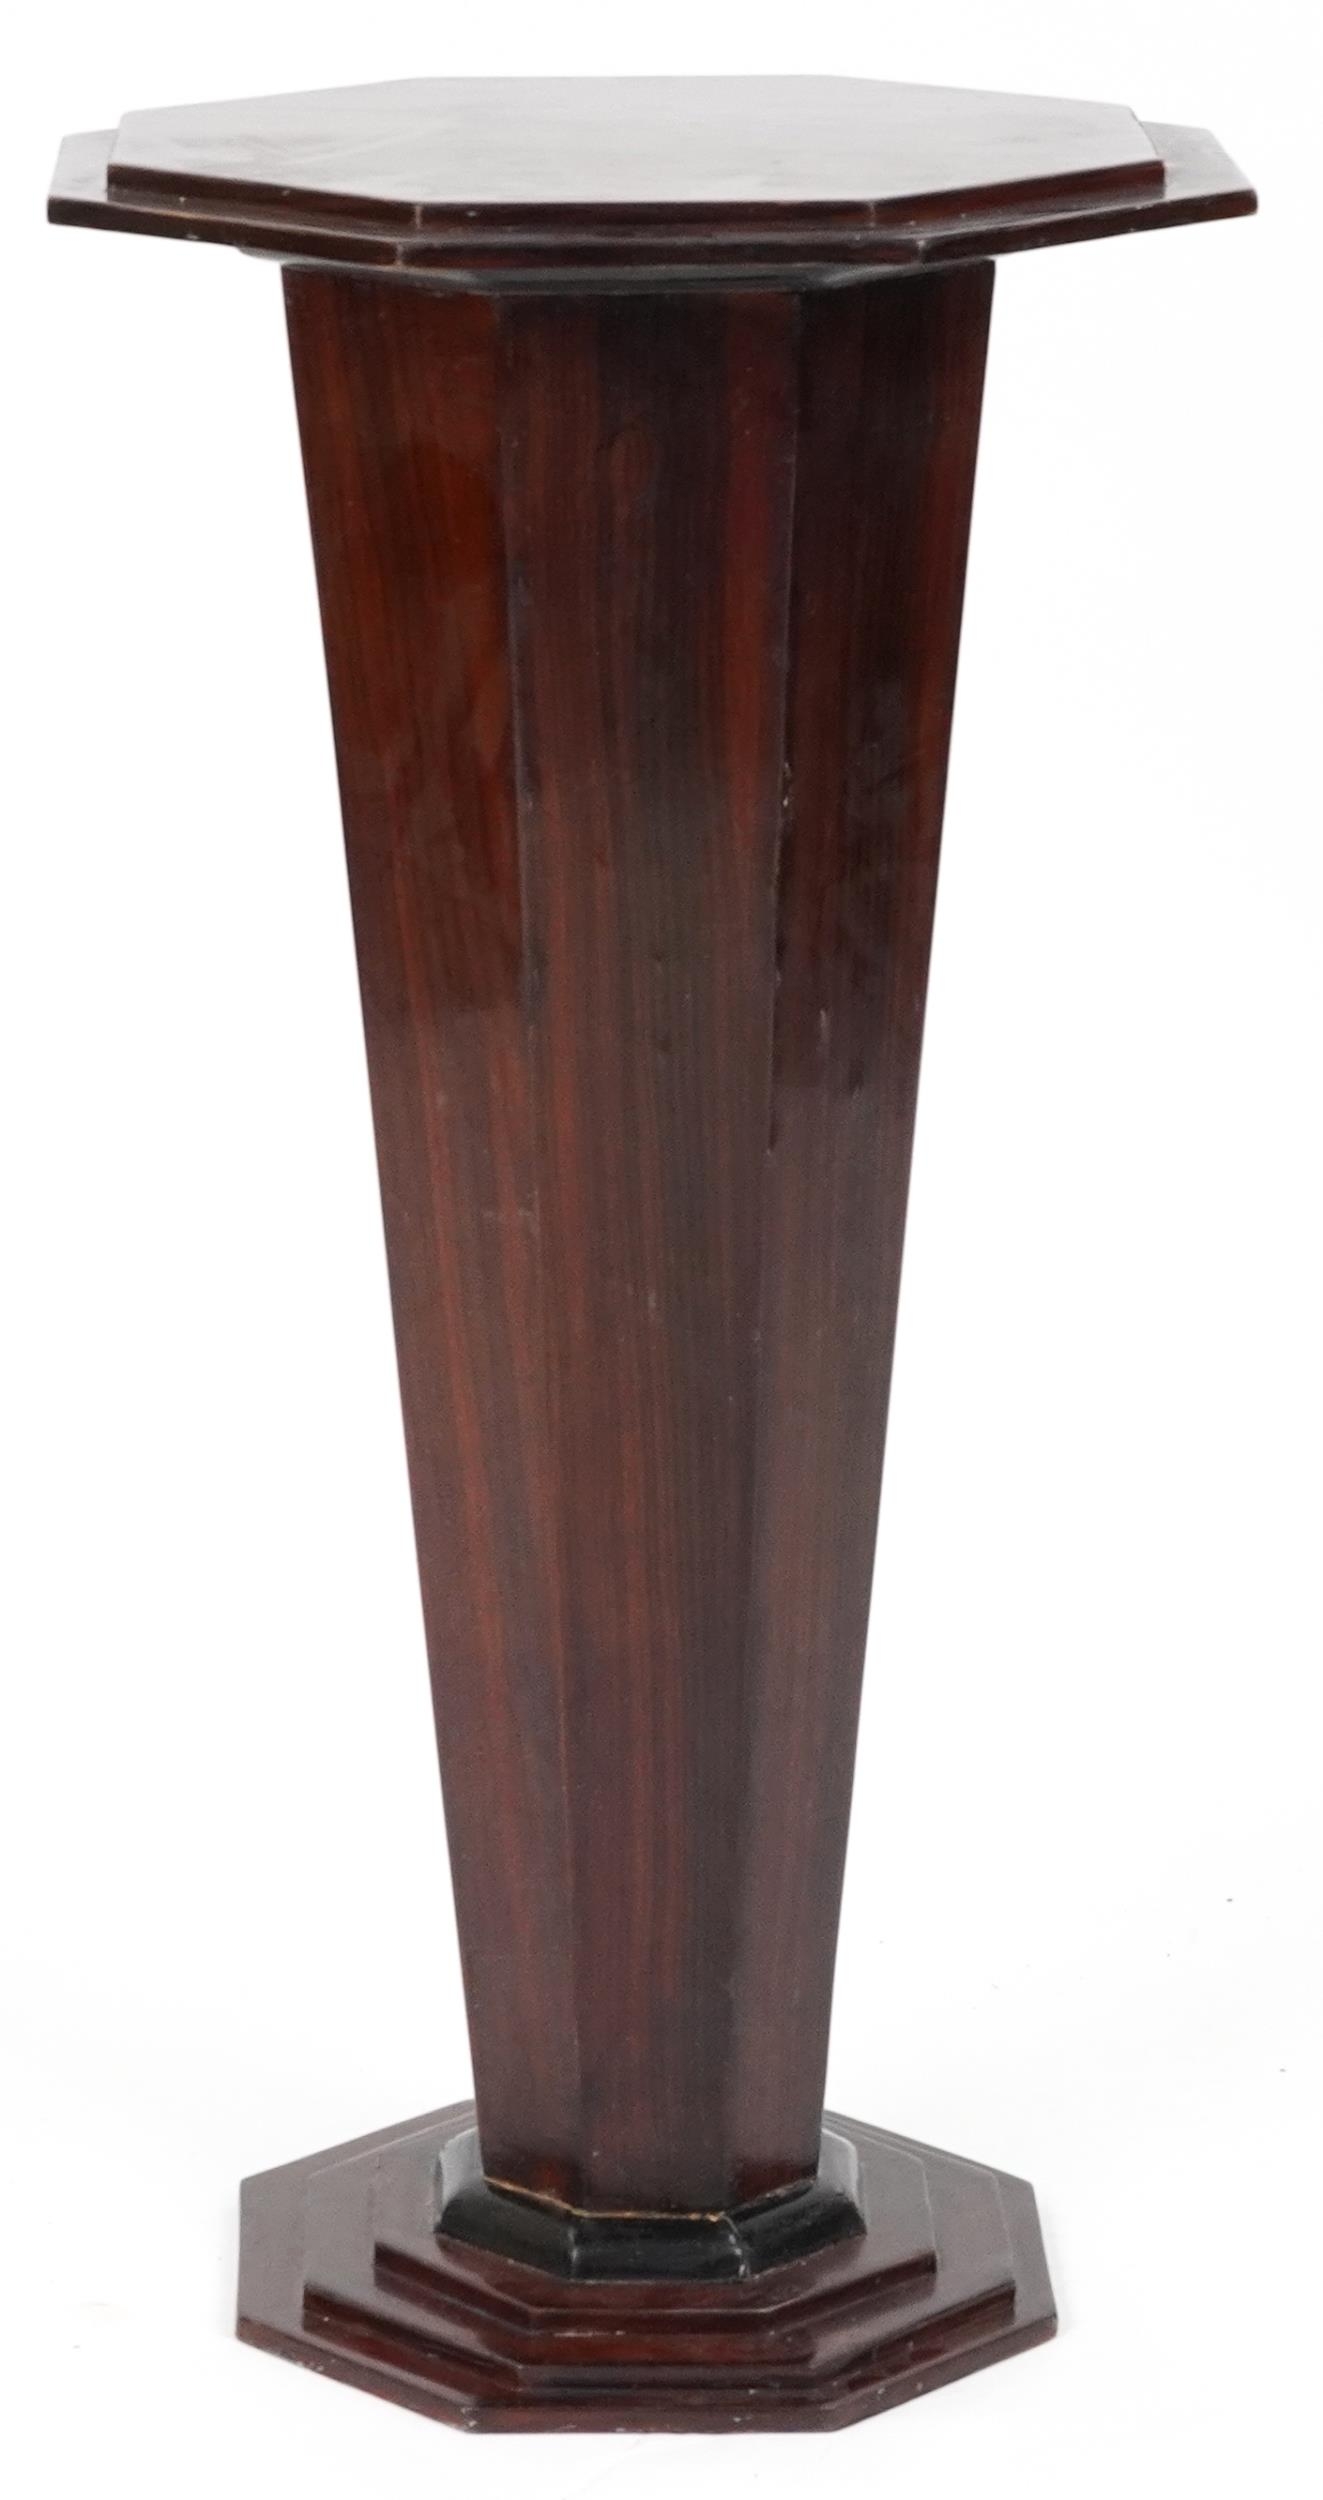 Art Deco style octagonal rosewood effect side pedestal with tapering column, 78.5cm high - Image 3 of 3